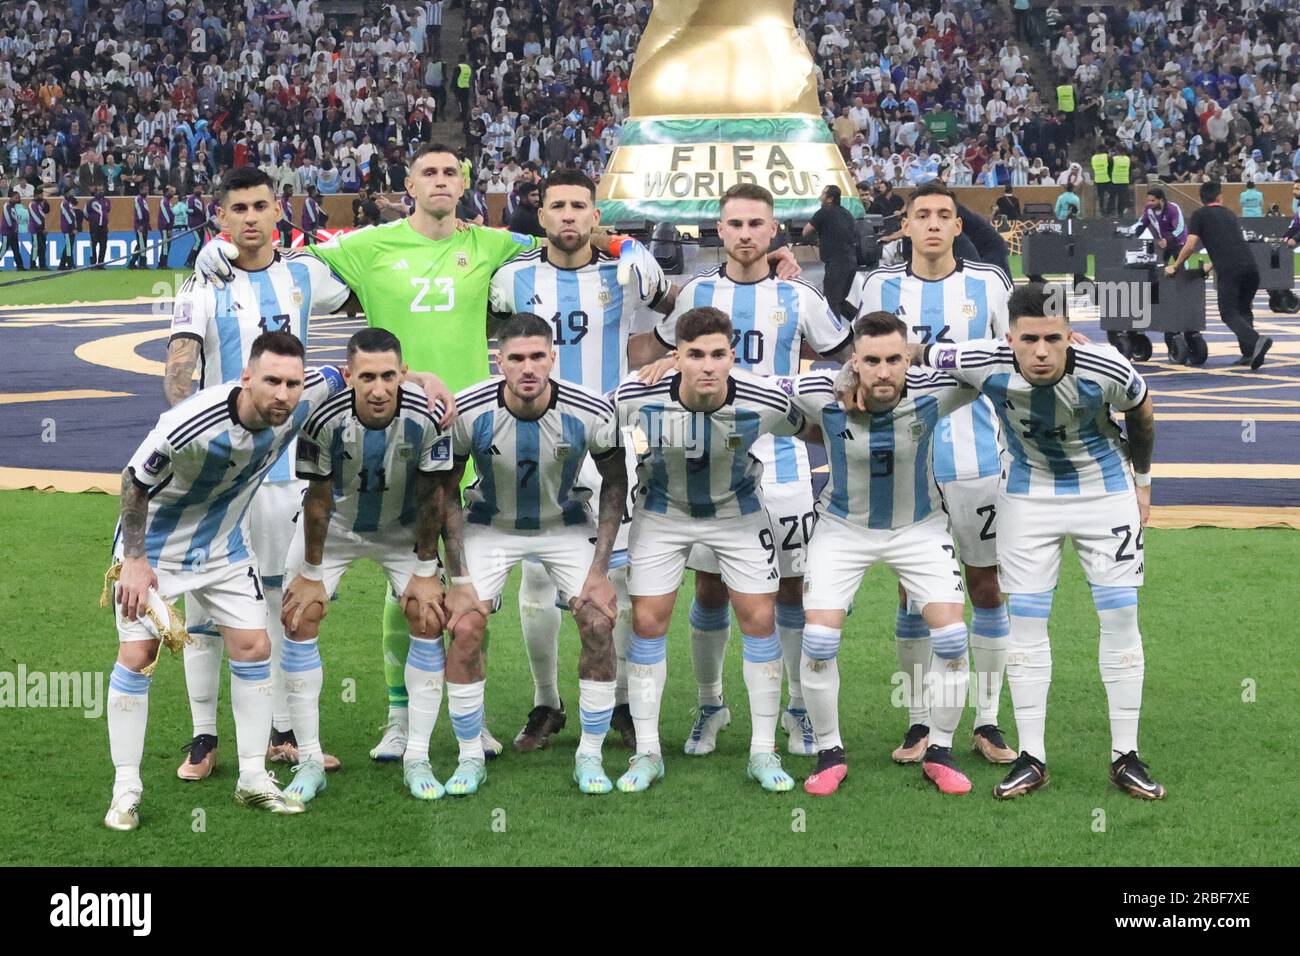 Lusail, Qatar, 18th. December 2022. Argentina National Team. Argentina vs. France, Match 64, Final match of the Fifa World Cup Qatar 2022.. Credit: Fa Stock Photo